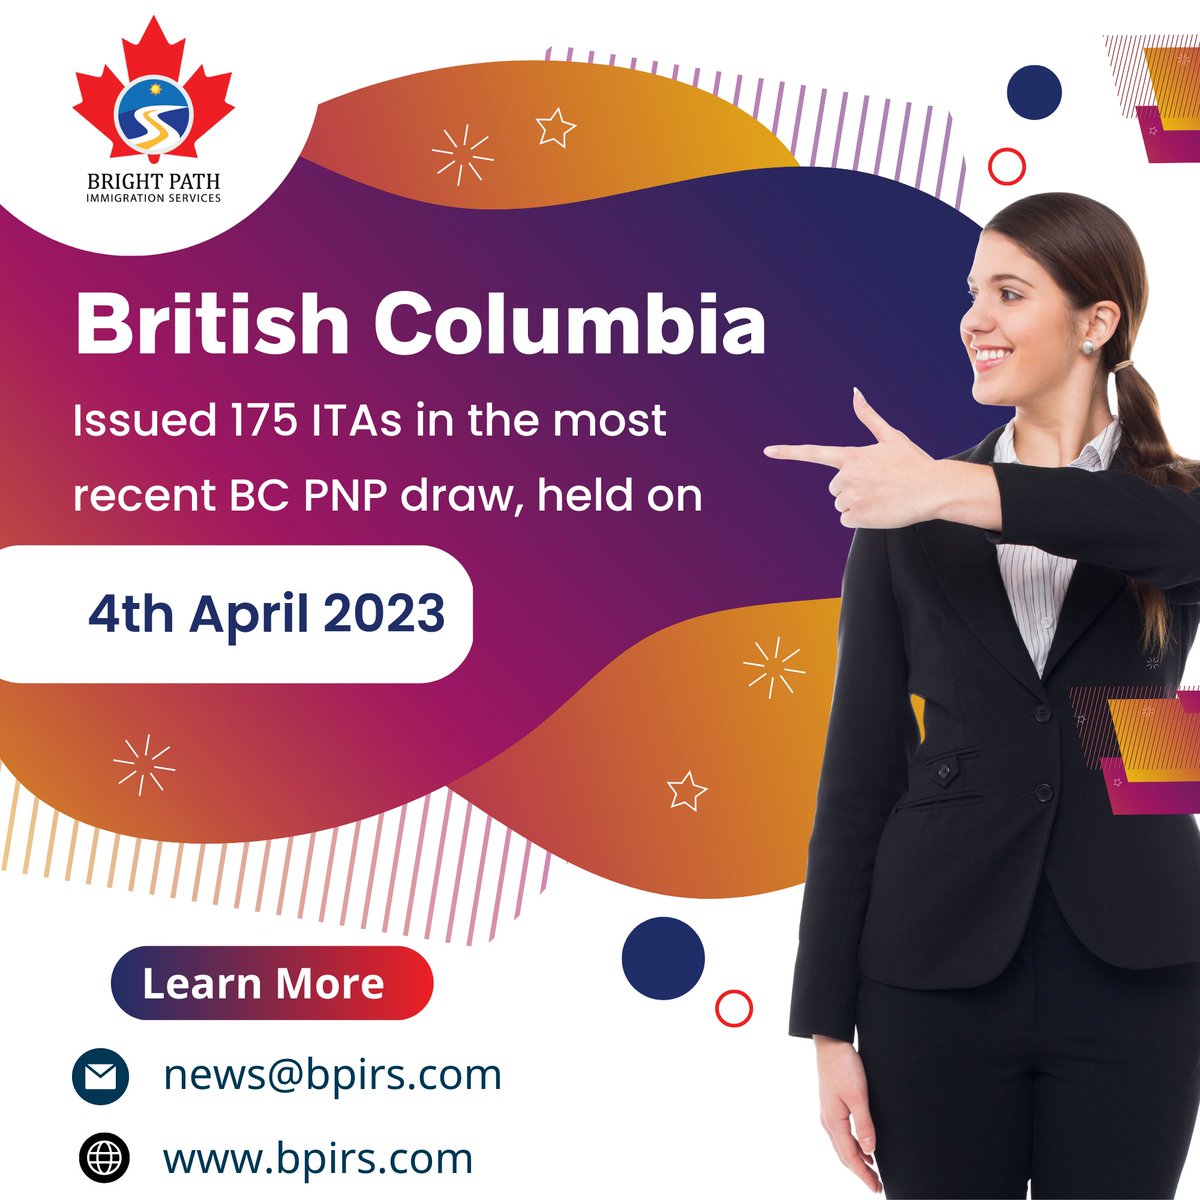 British Columbia issued 175 ITAs in the most recent BC PNP Draw, held on 4th April 2023.

🍁CONTACT US 🍁
📧: news@bpirs.com
🌐: bpirs.com

#bpirs #canadaimmigration #canada #britishcolumbia #britishcolumbiacanada #pnpdraw #immigrationnews